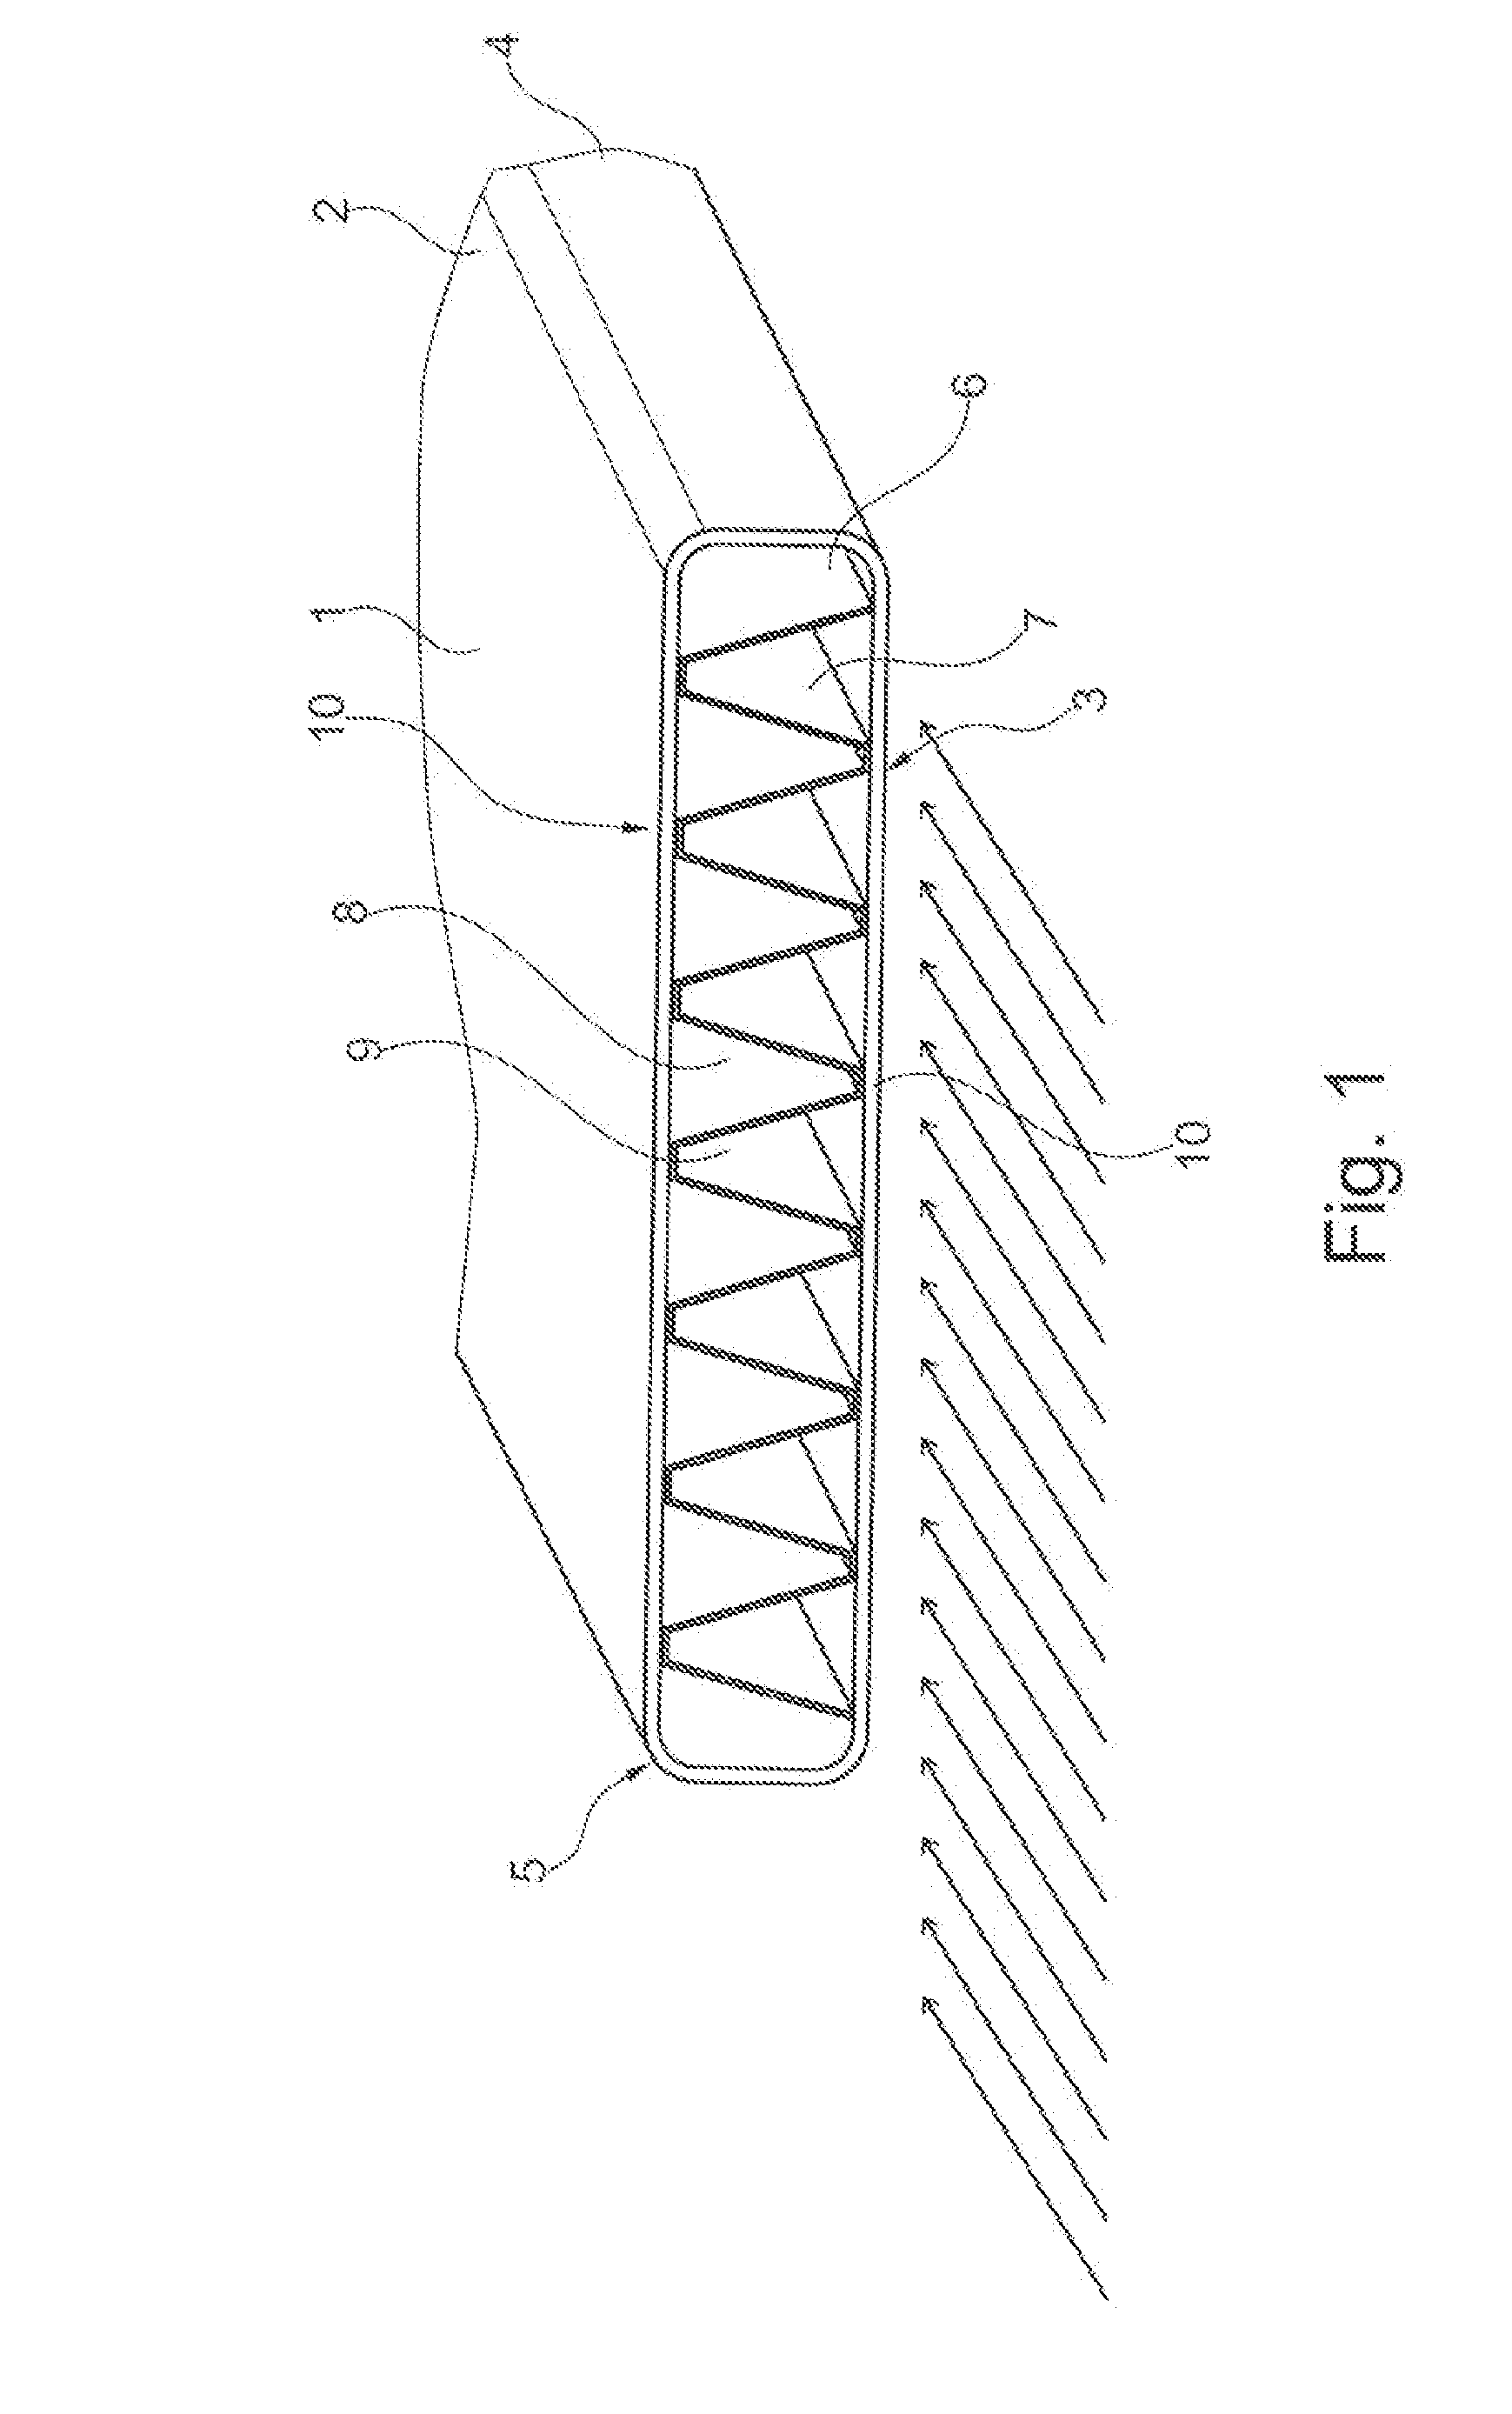 Corrugated fin and method for producing it